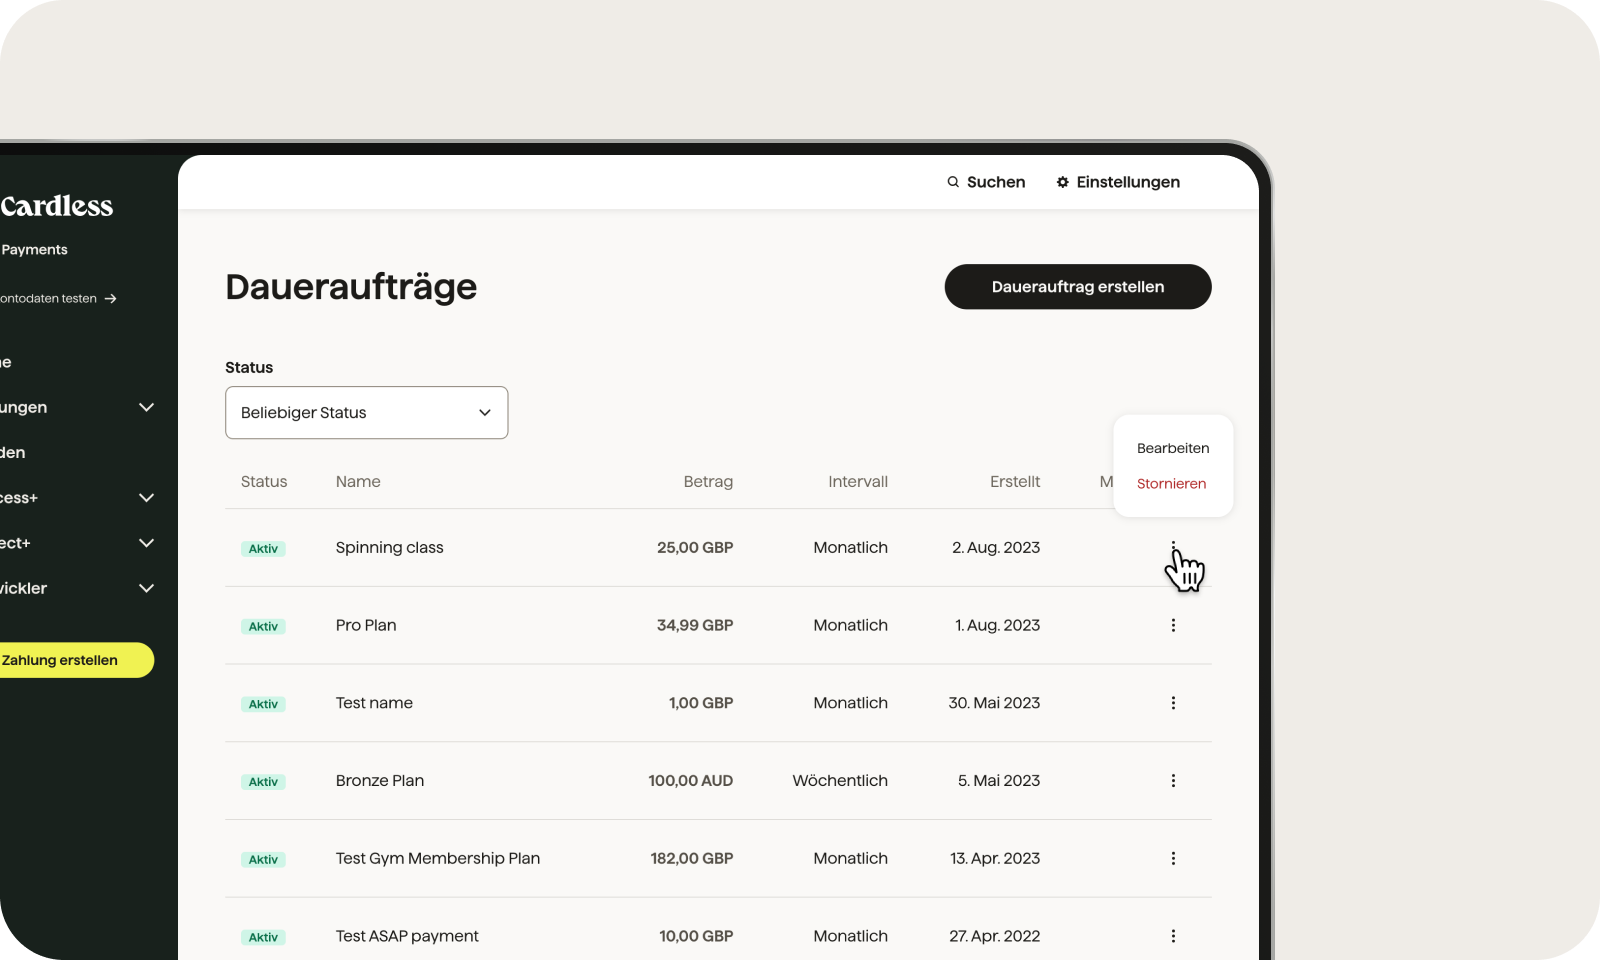 Subscriptions dashboard